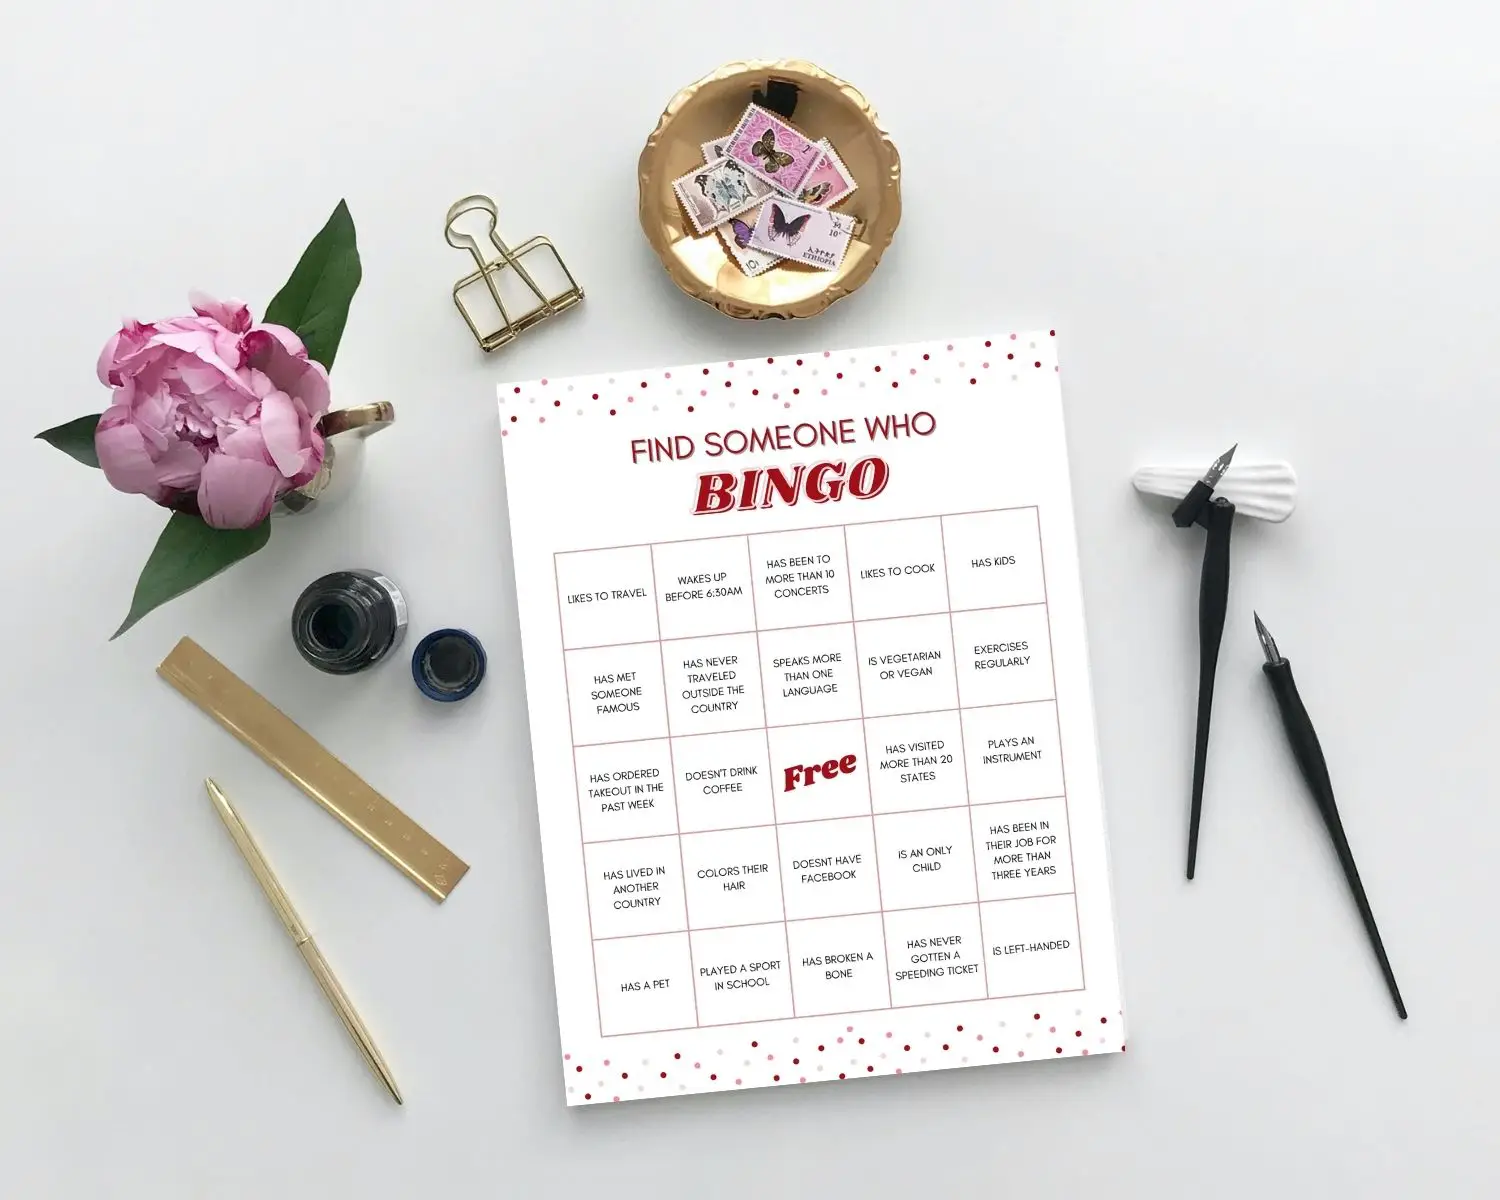 Icebreaker Bingo sits on a desk next to some flowers and clips